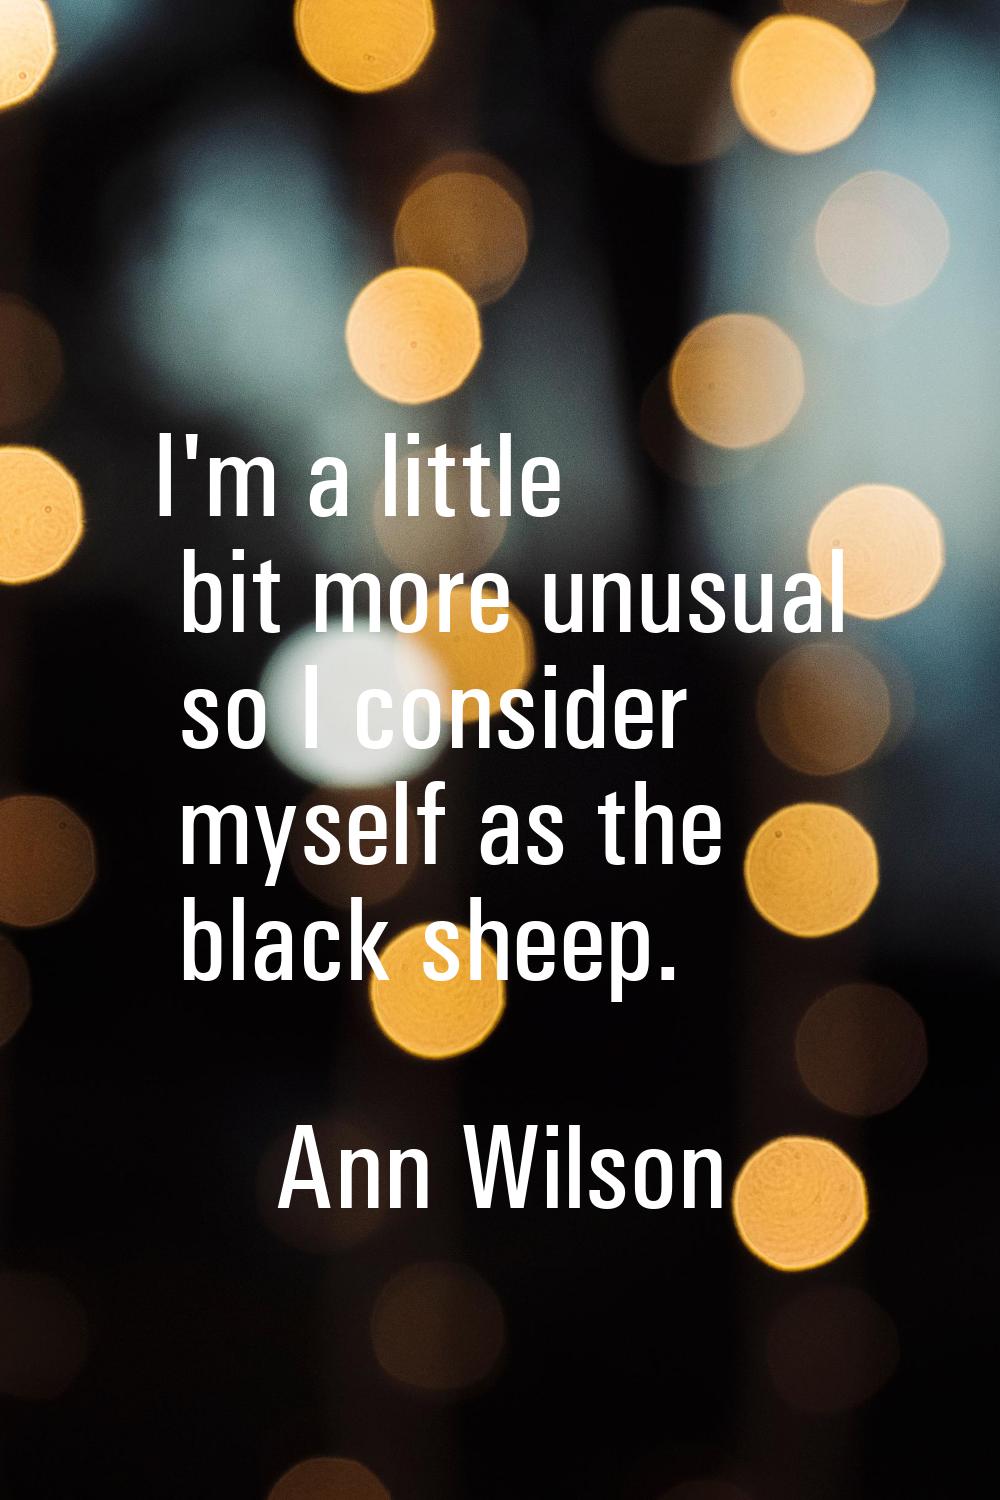 I'm a little bit more unusual so I consider myself as the black sheep.